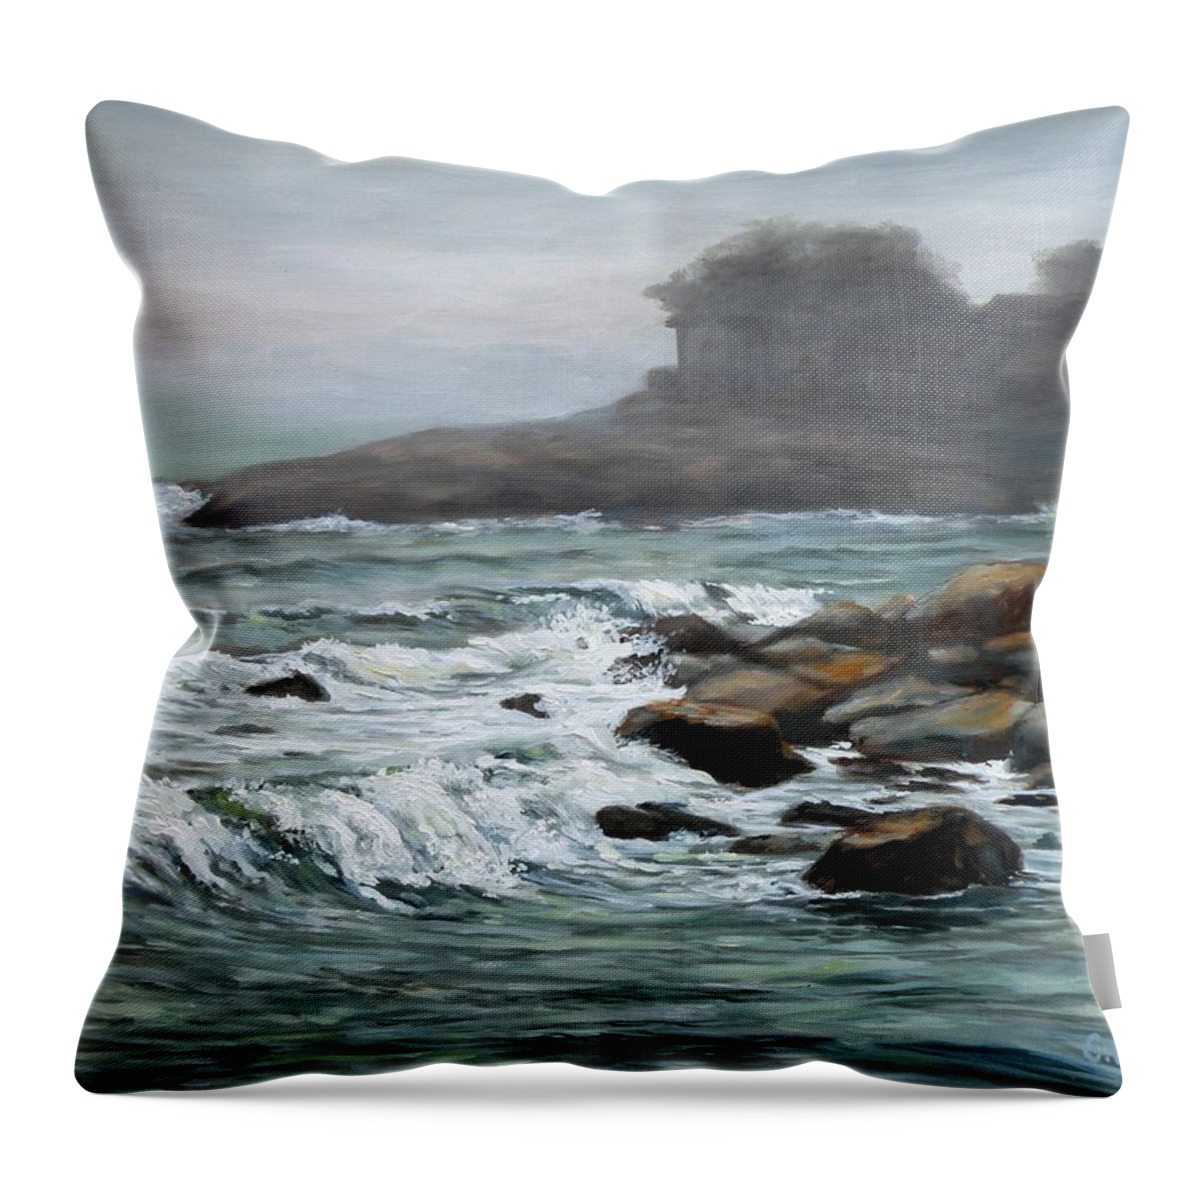 Ocean Throw Pillow featuring the painting Foggy Day At Old Garden Beach by Eileen Patten Oliver